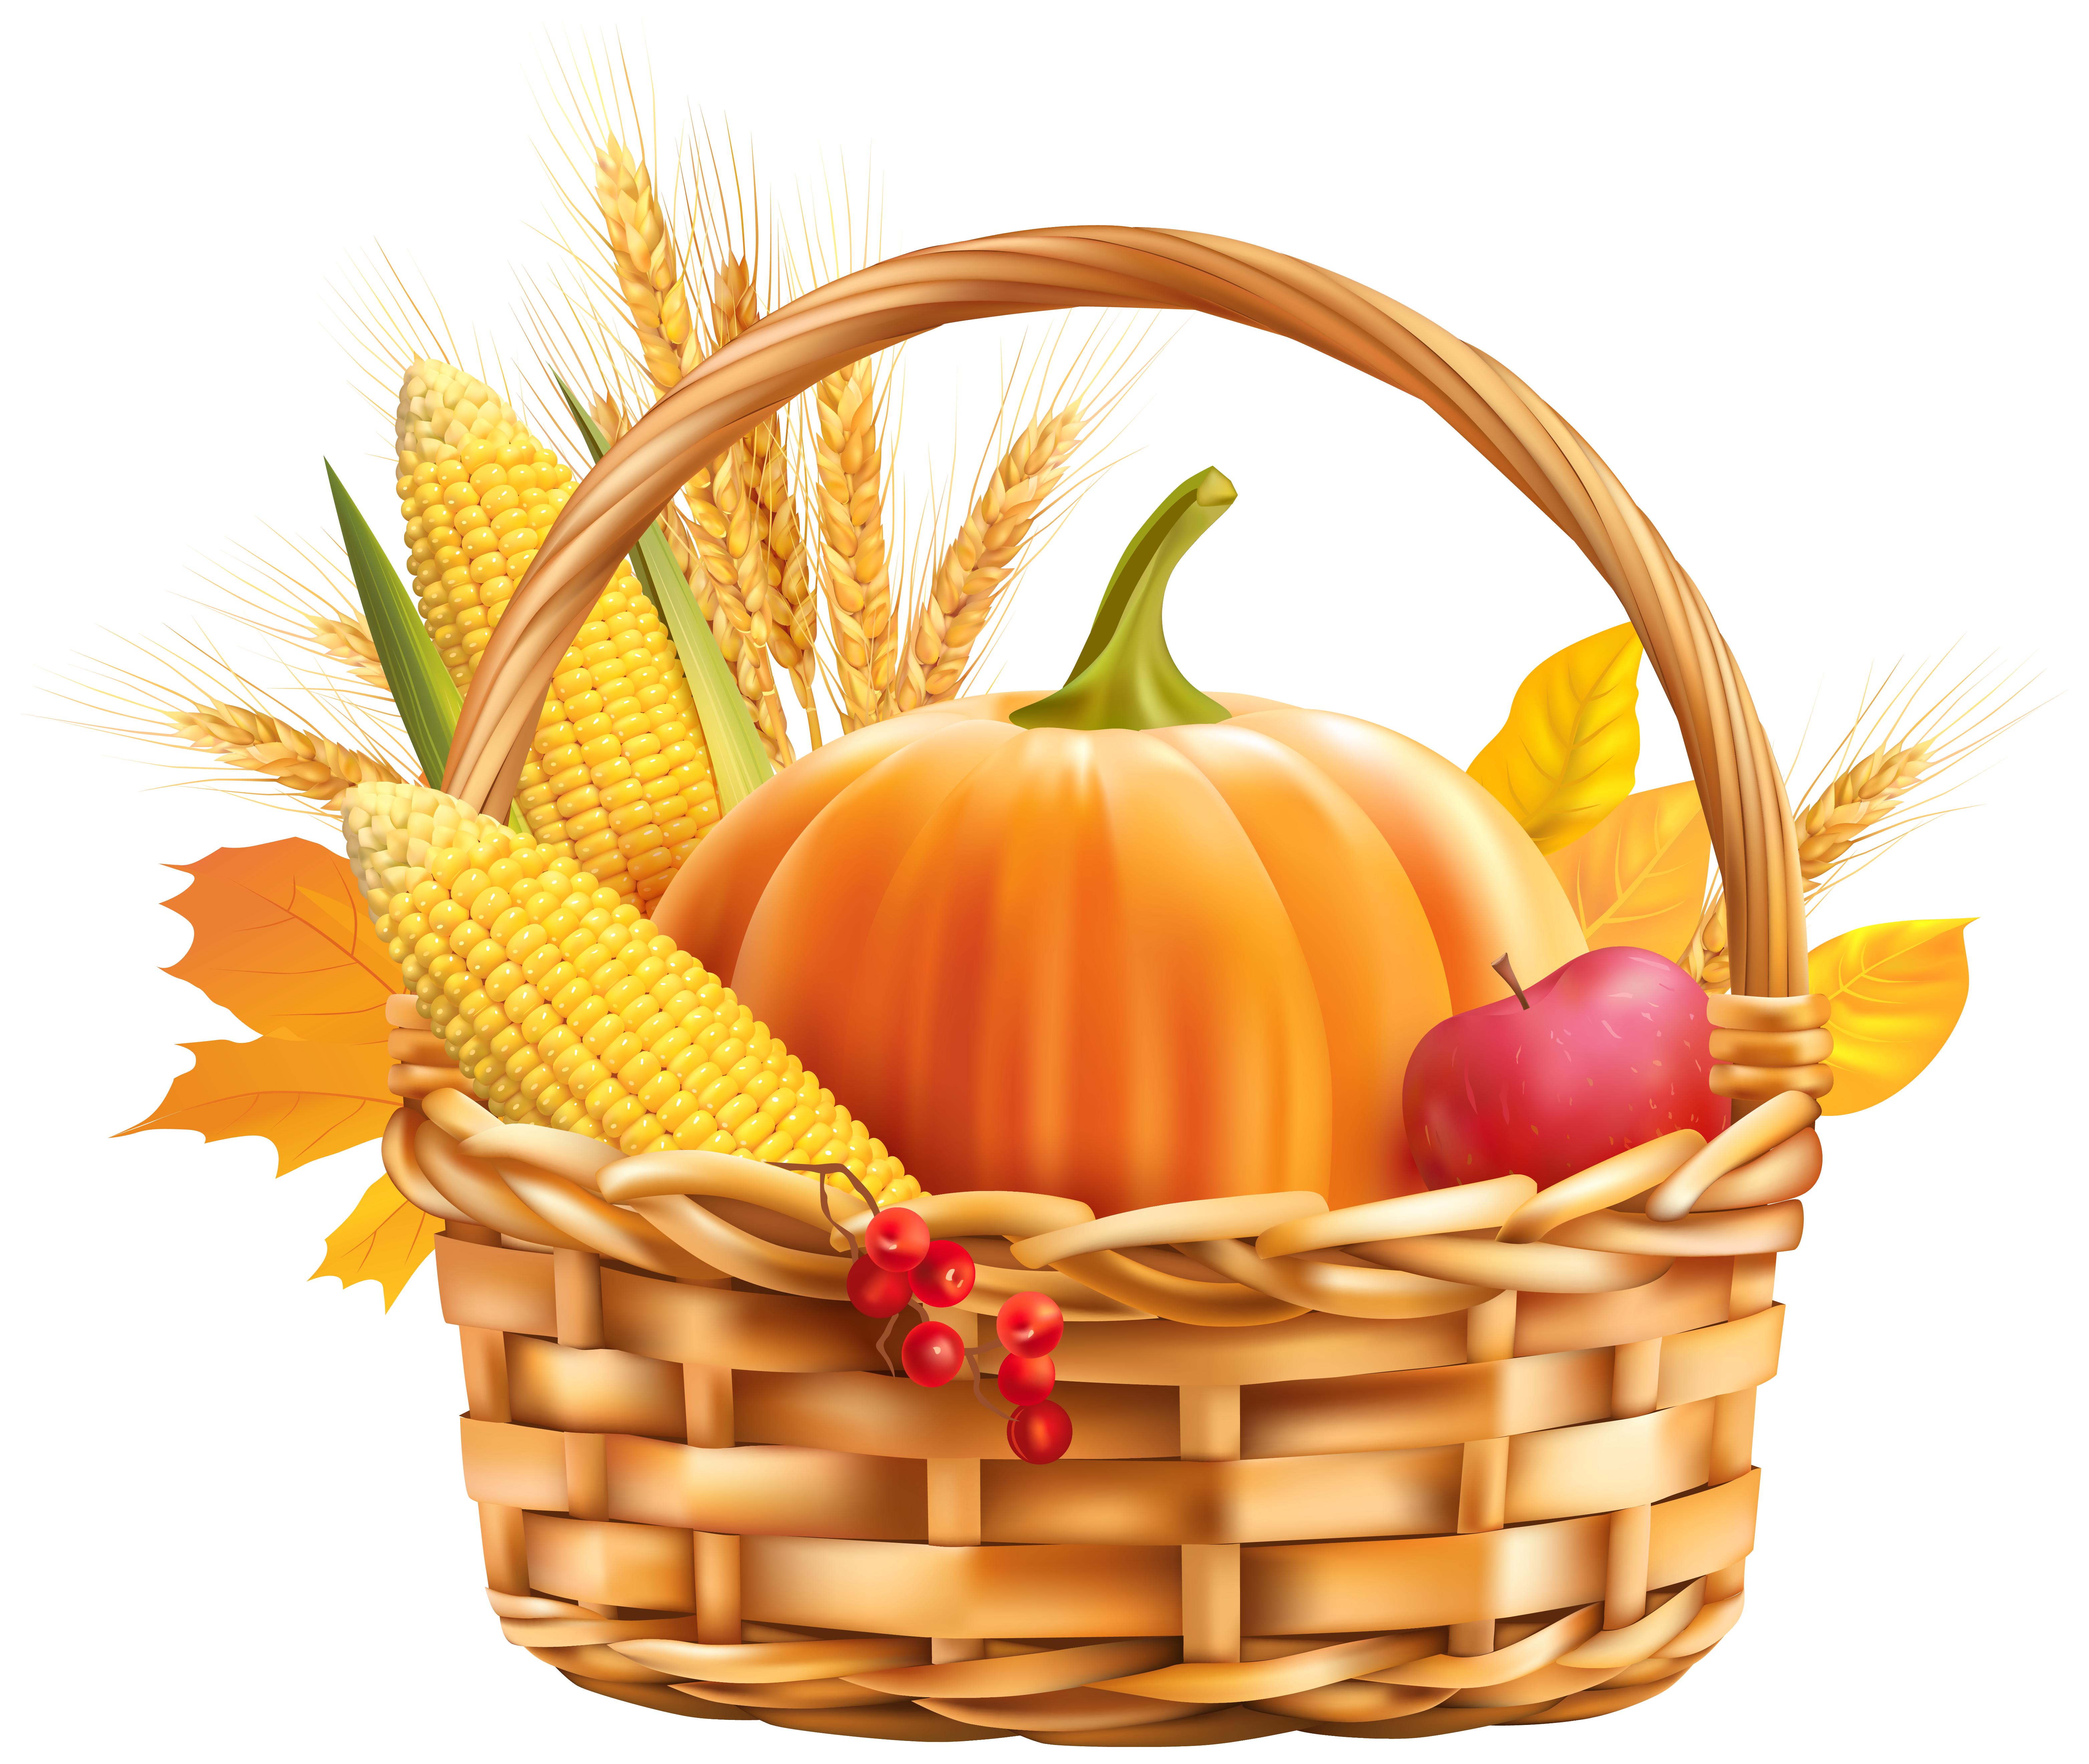 File:Harvest basket with plow